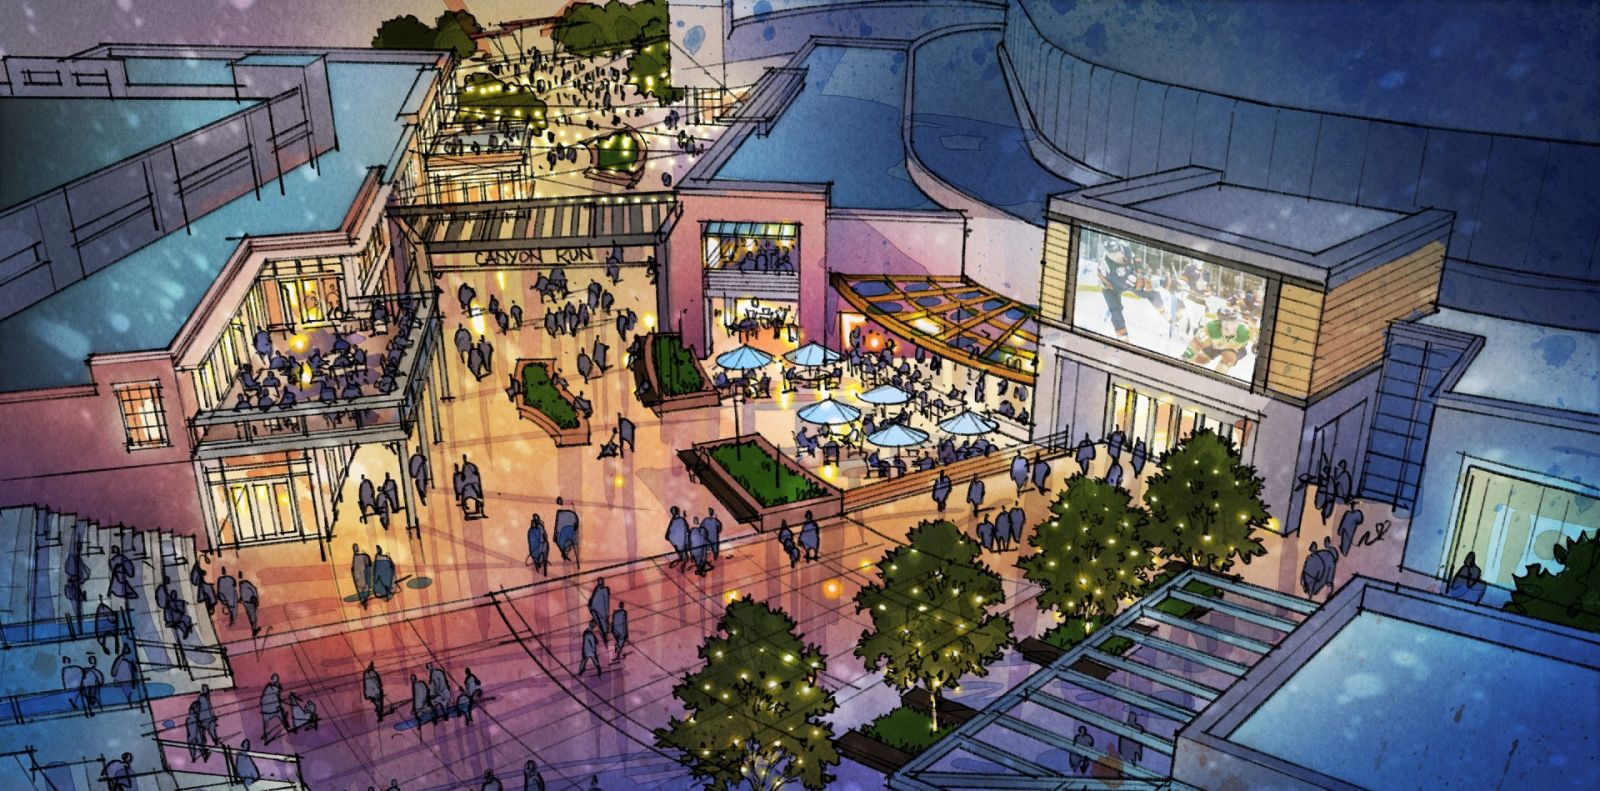 An early rendering of the project shows pedestrian-friendly areas, retail and entertainment opportunities surrounding the Bon Secours Wellness Arena and the proposed site. (Photo/Provided)